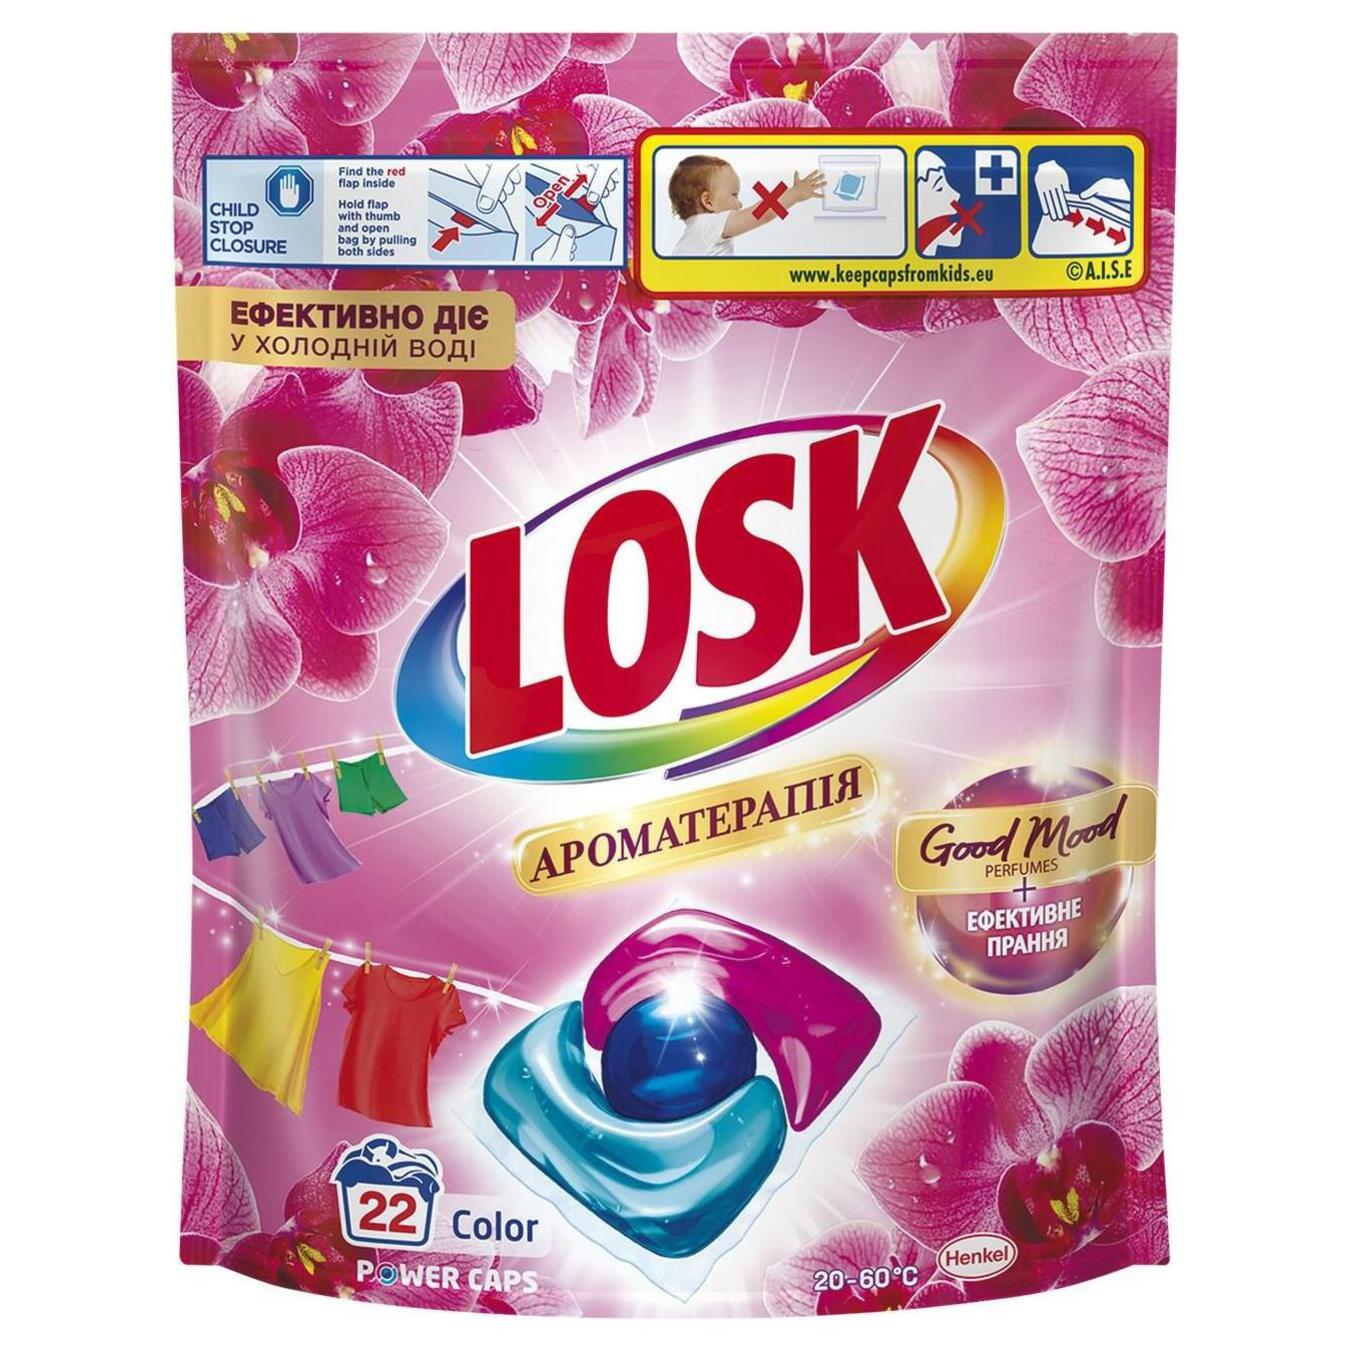 Capsules for washing Losk trio-capsules JSC Essential oils and aroma Malaysian flower 22 pcs.